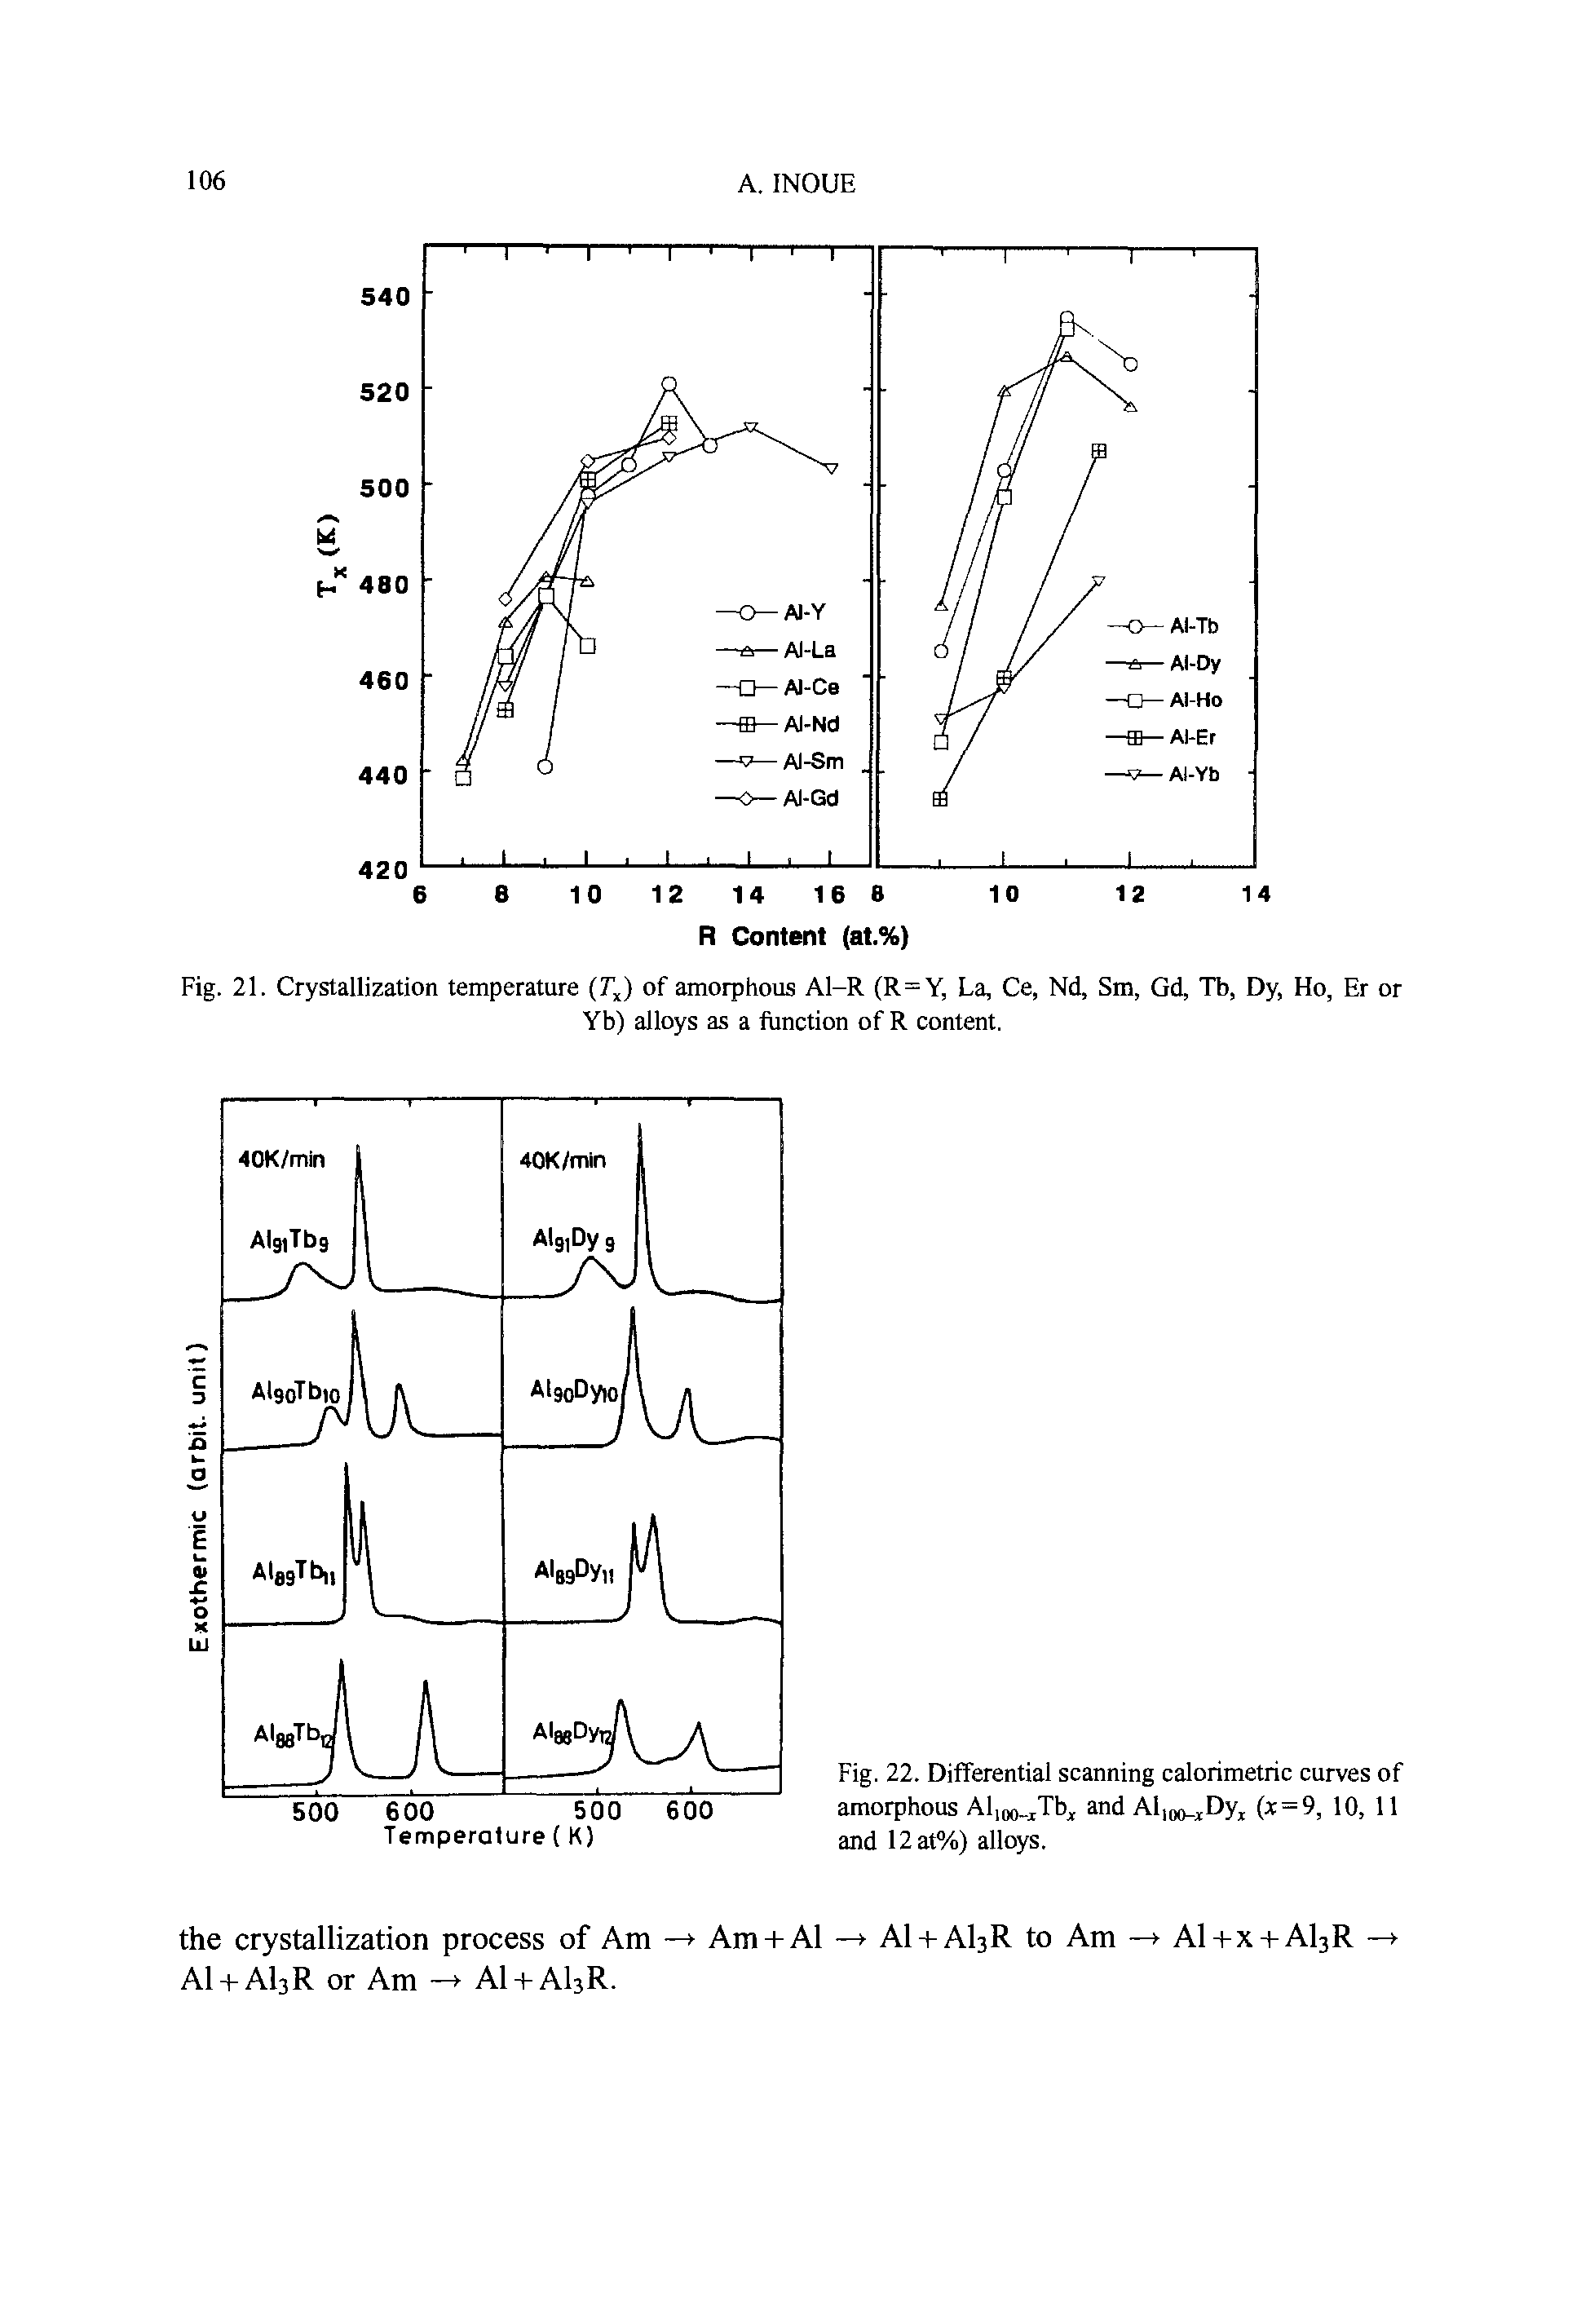 Fig. 22. Differential scanning calorimetric curves of amorphous Al, o jTb and Al o jDyj (x = 9, 10, 11 and 12at%) alloys.